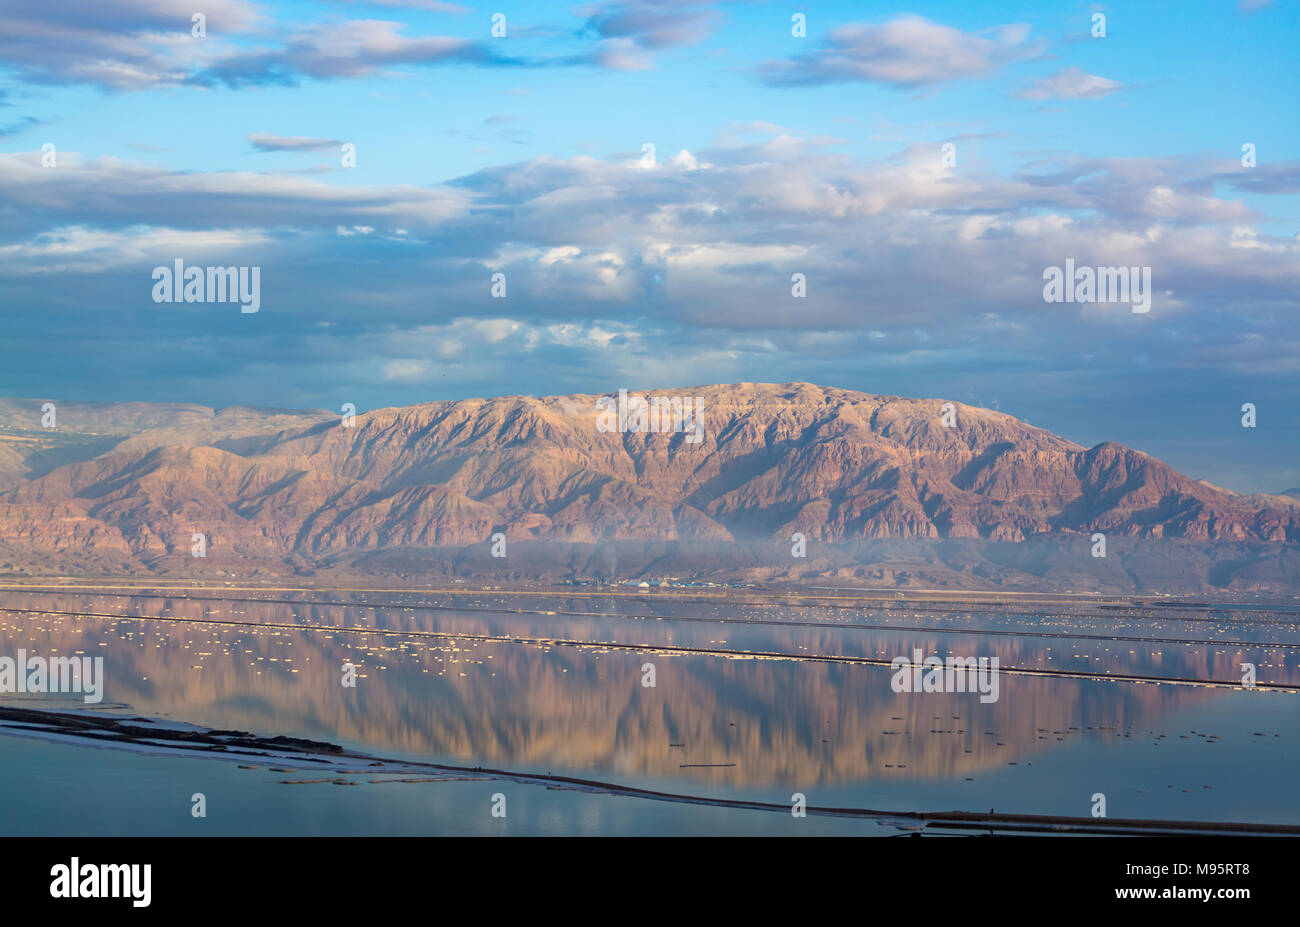 Lowest salty lake in world below sea level Dead sea, full of minerals near luxury vacation resort Ein Bokek, perfect place for medical treatments, cli Stock Photo